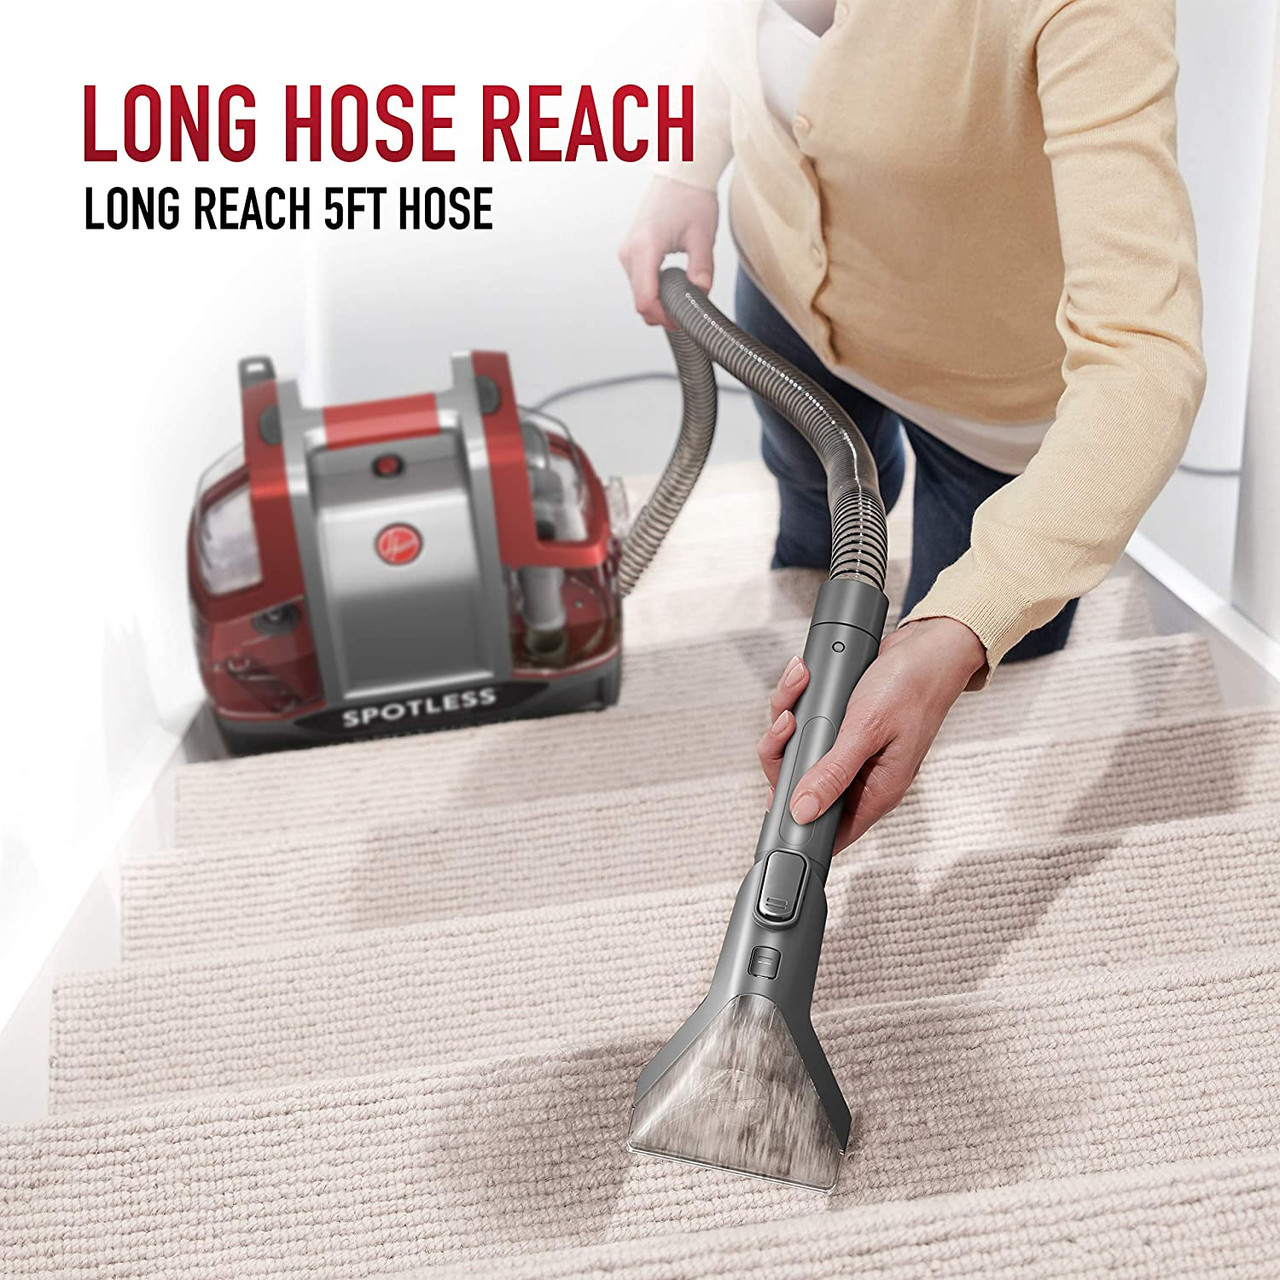 FH11300 by Hoover - Spotless Portable Carpet & Upholstery Cleaner